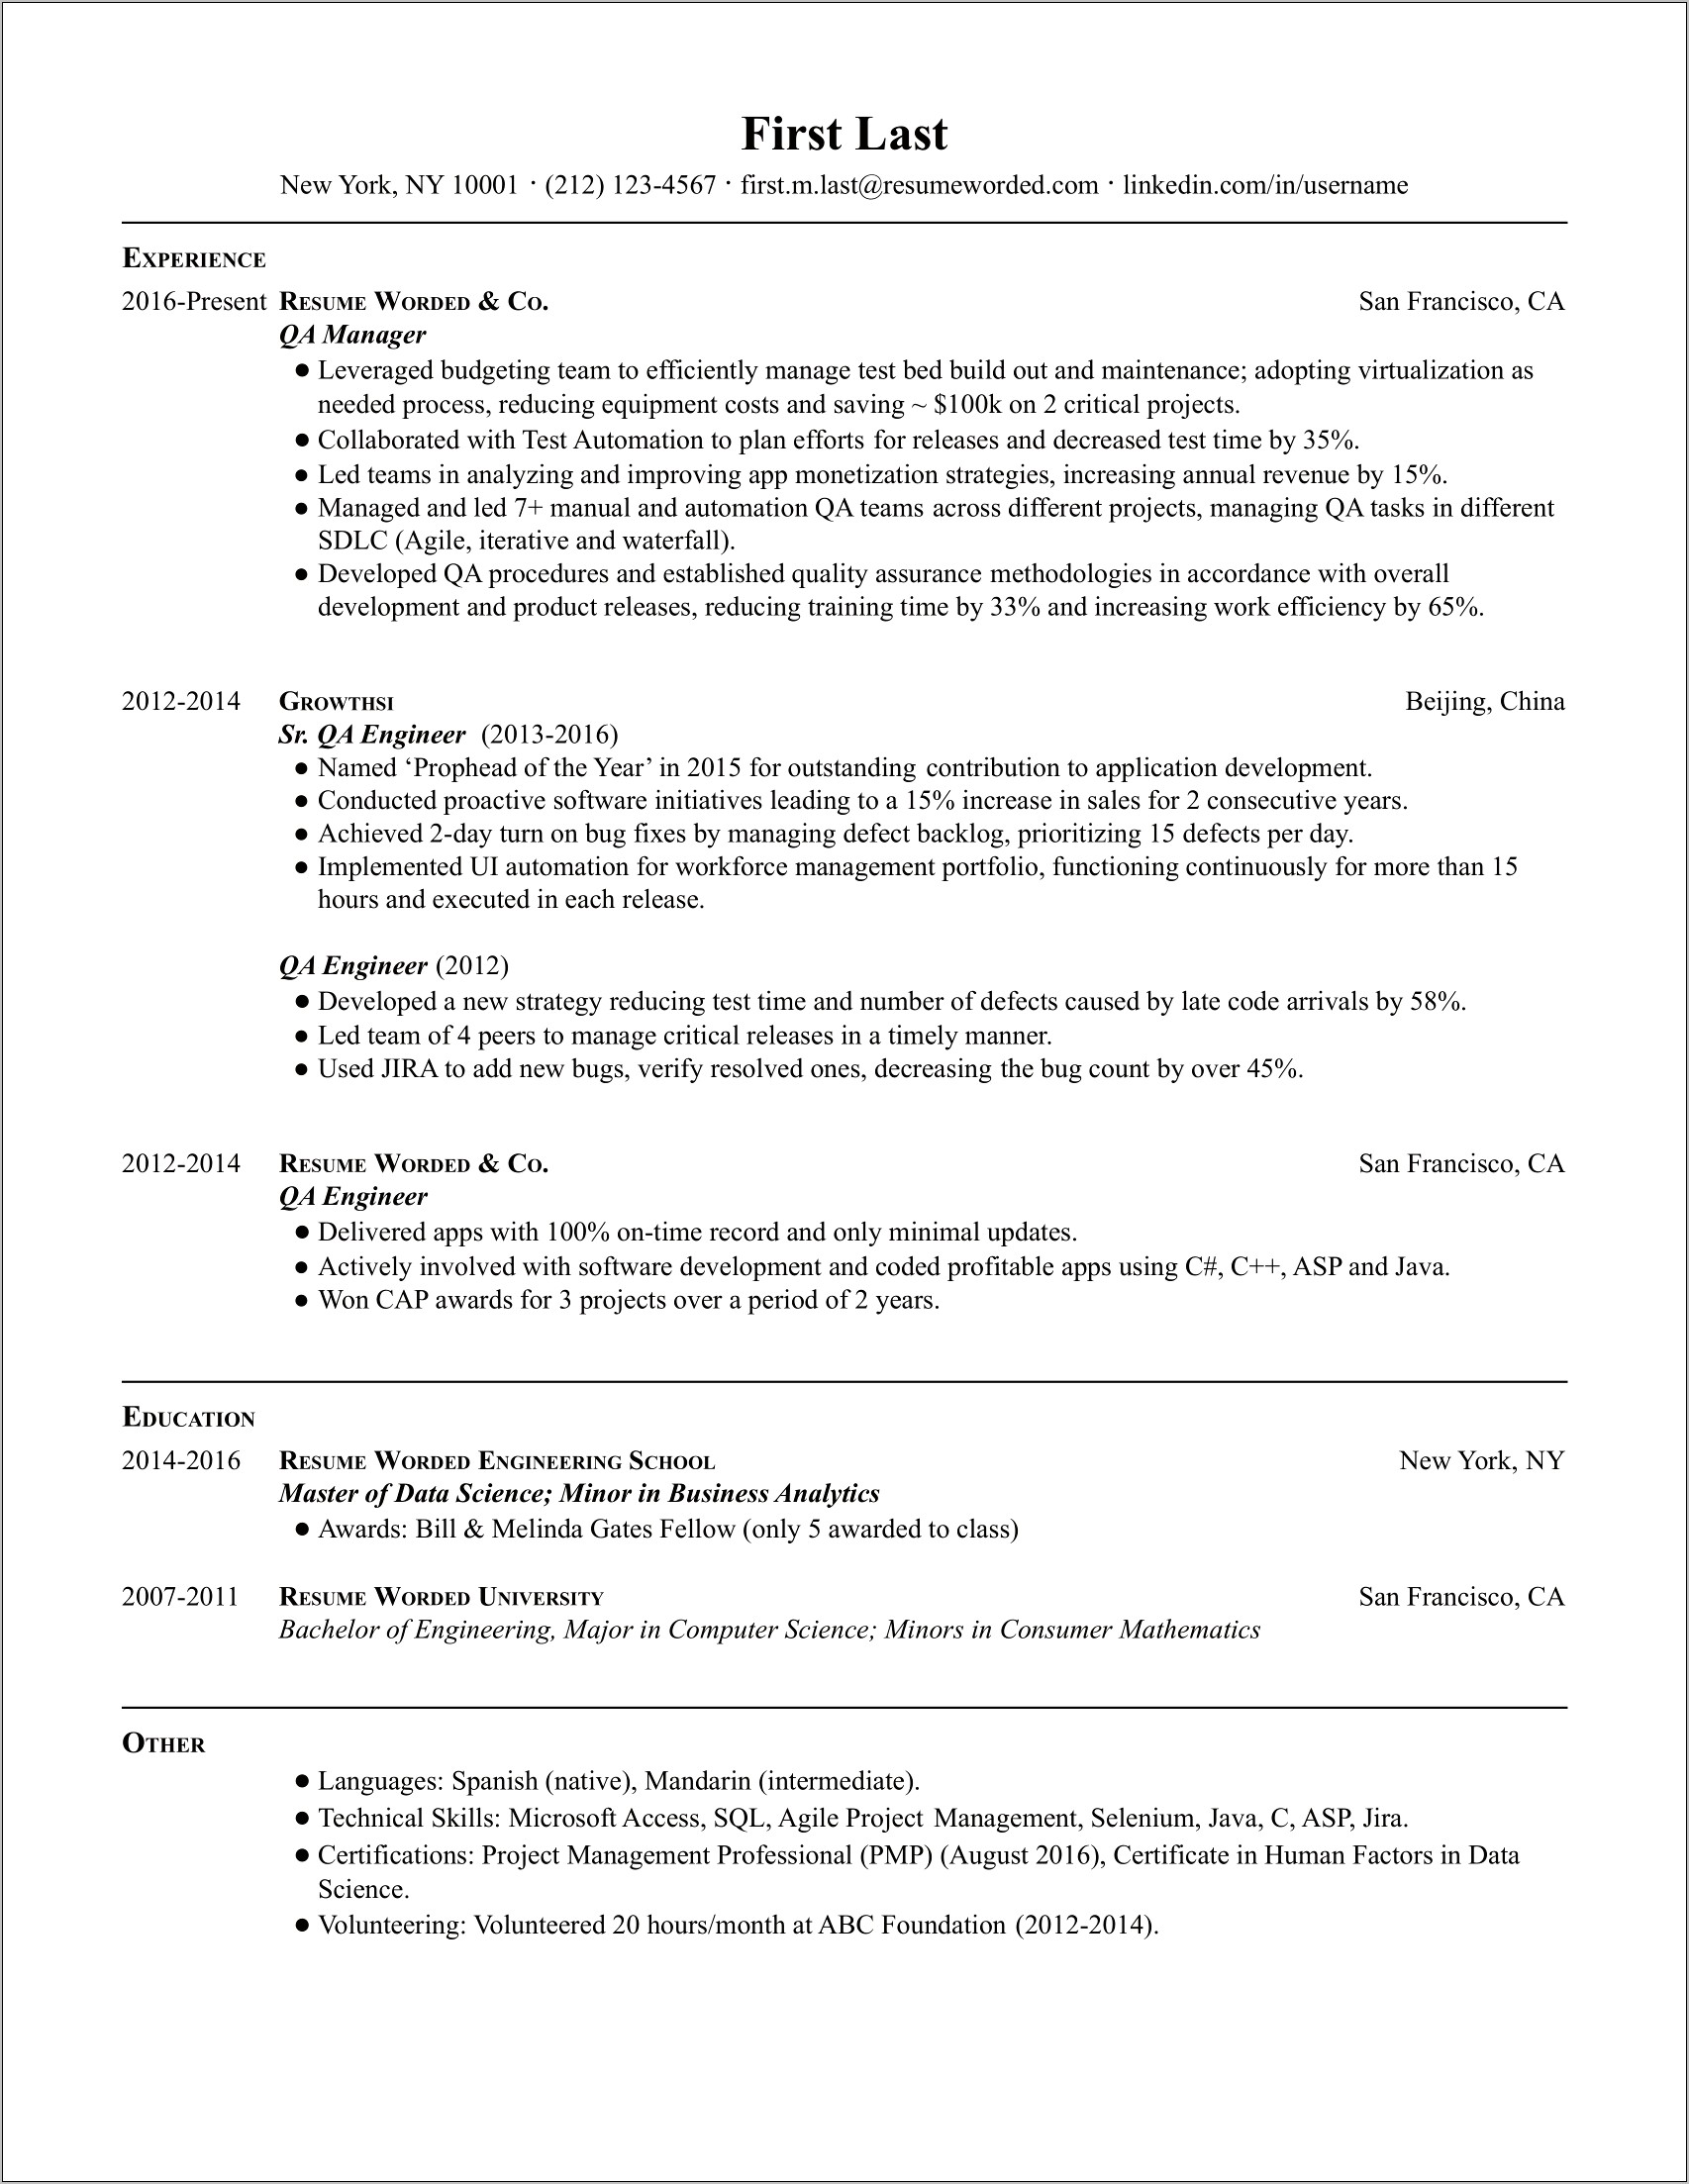 Resume Examples For Qa Lead Food